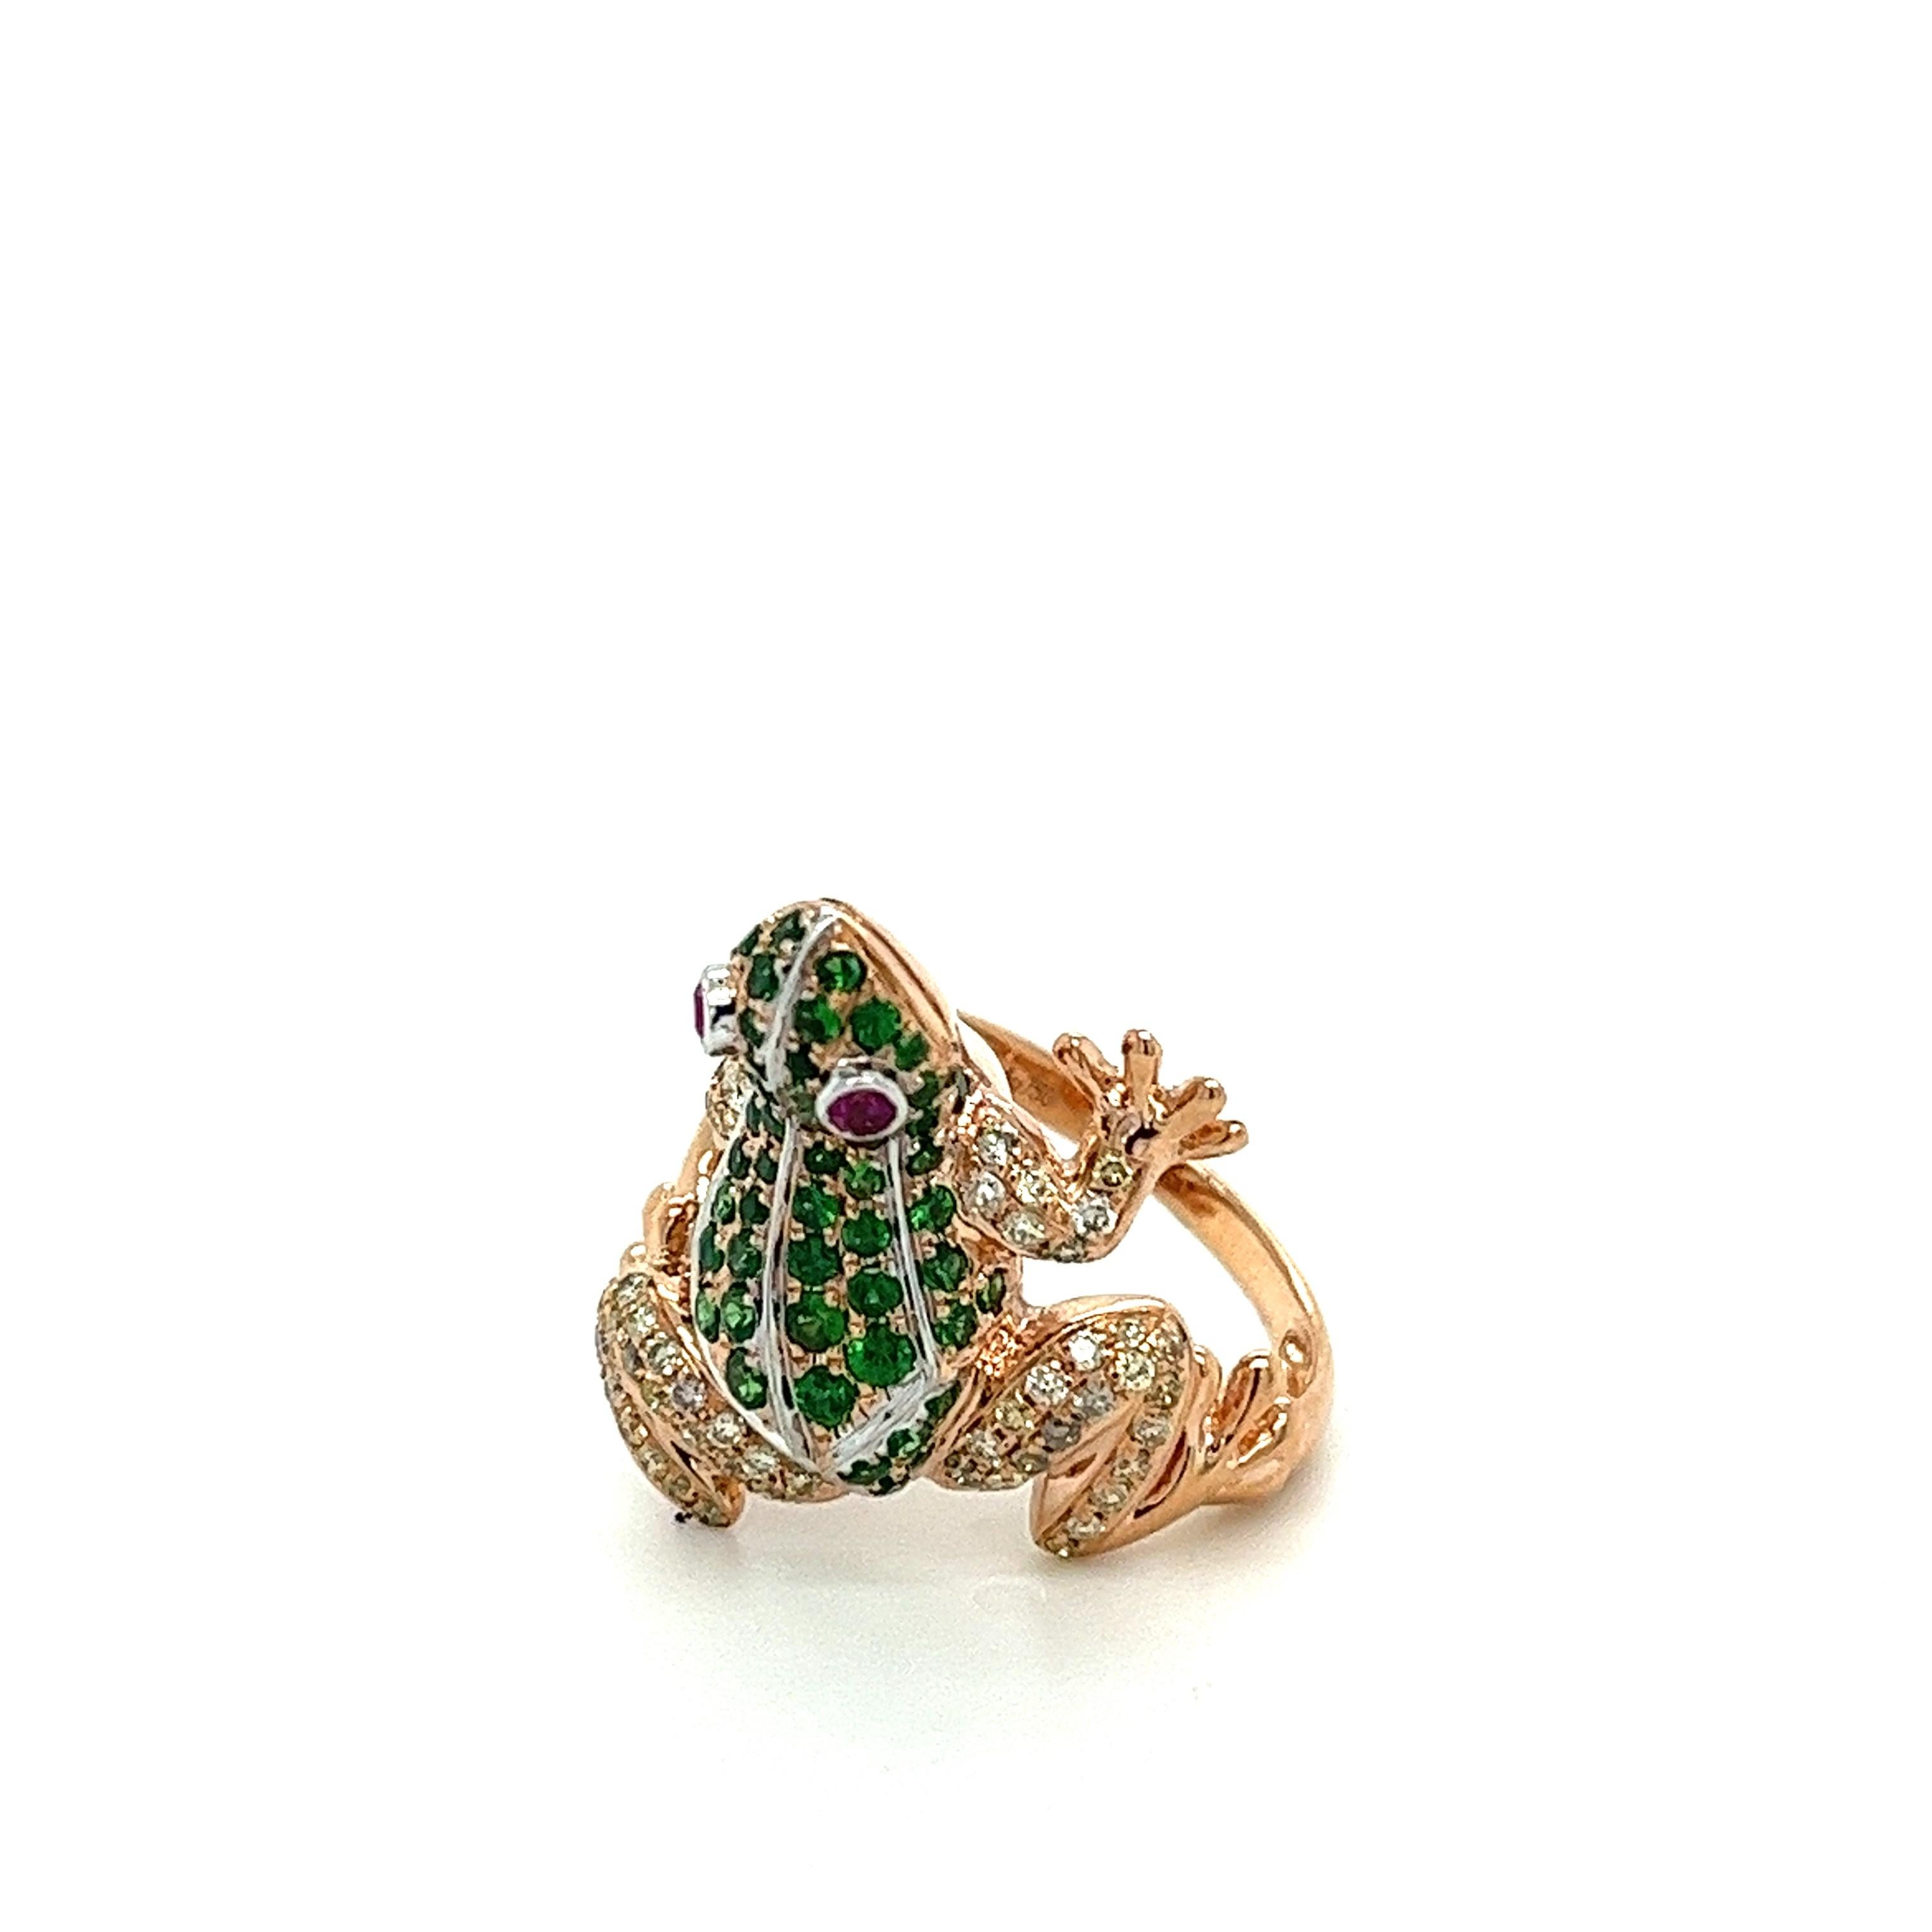 18K Rose Gold Frog Ring with
Diamonds & Green Garnets
53 Diamonds - 0.39 CT
64 Green Garnets - 0.84 CT
2 Rubies - 0.07 CT
18K Rose Gold - 6.47 GM

Introducing the enchanting allure of our 18K Rose Gold Frog Ring. Embellished with a mesmerizing dance